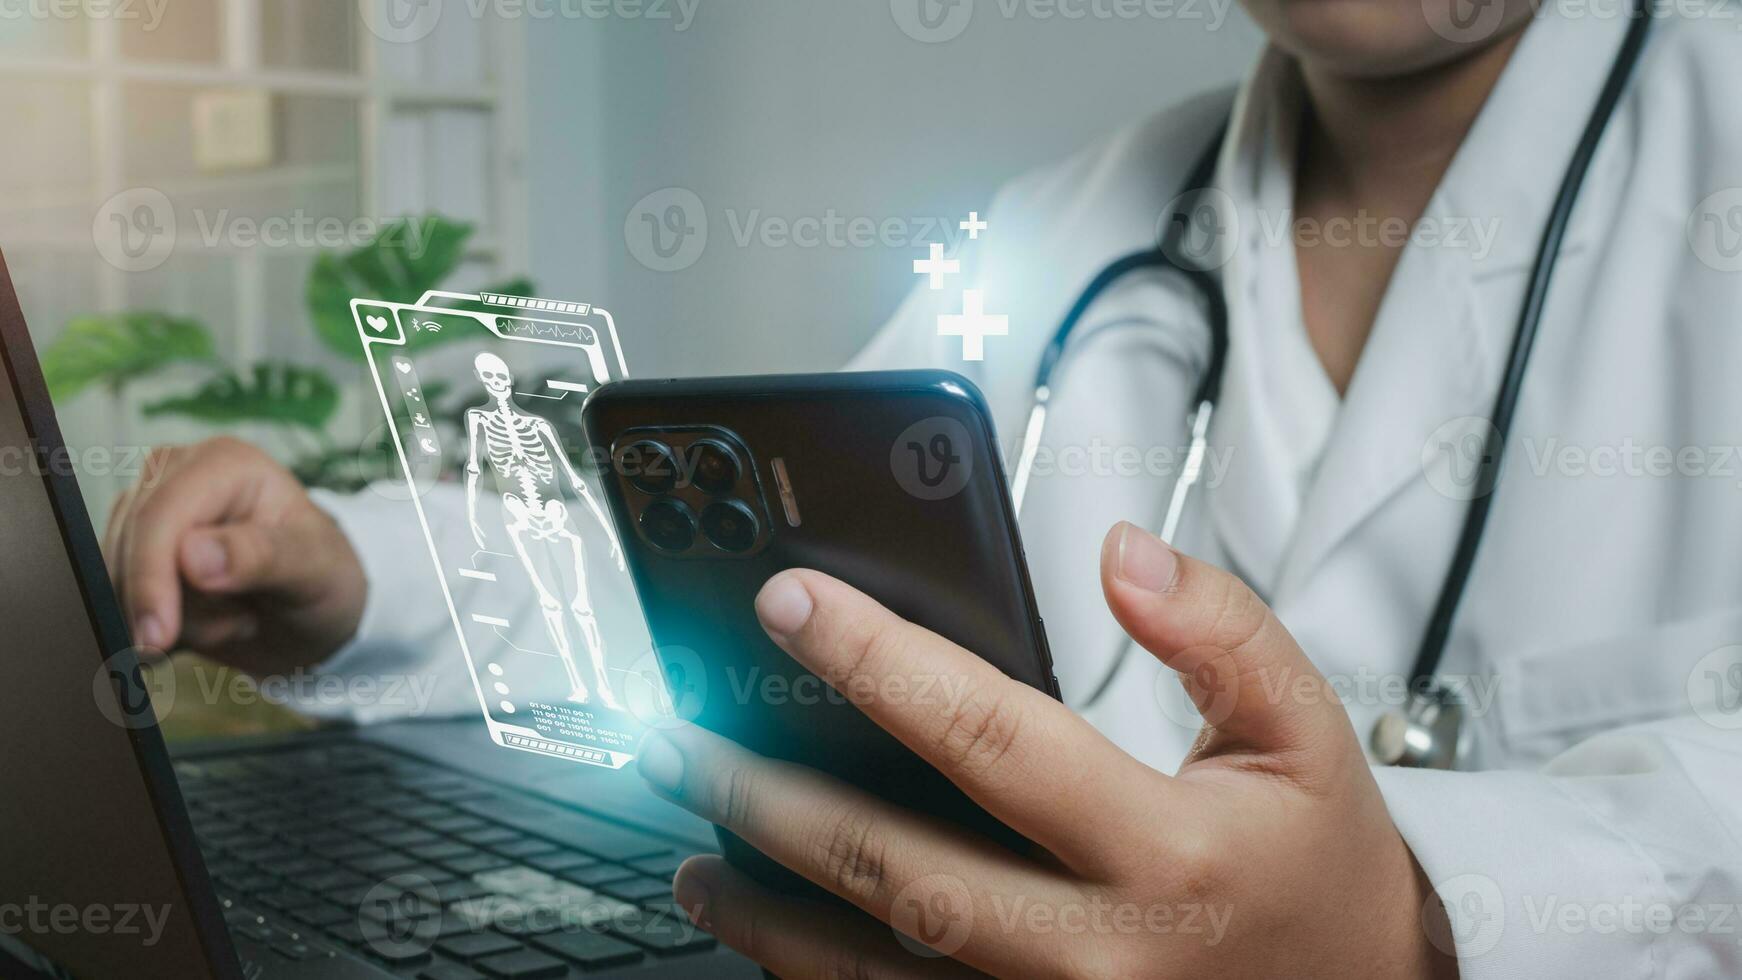 Doctors use smartphones and computers to research medical information. medical concept photo